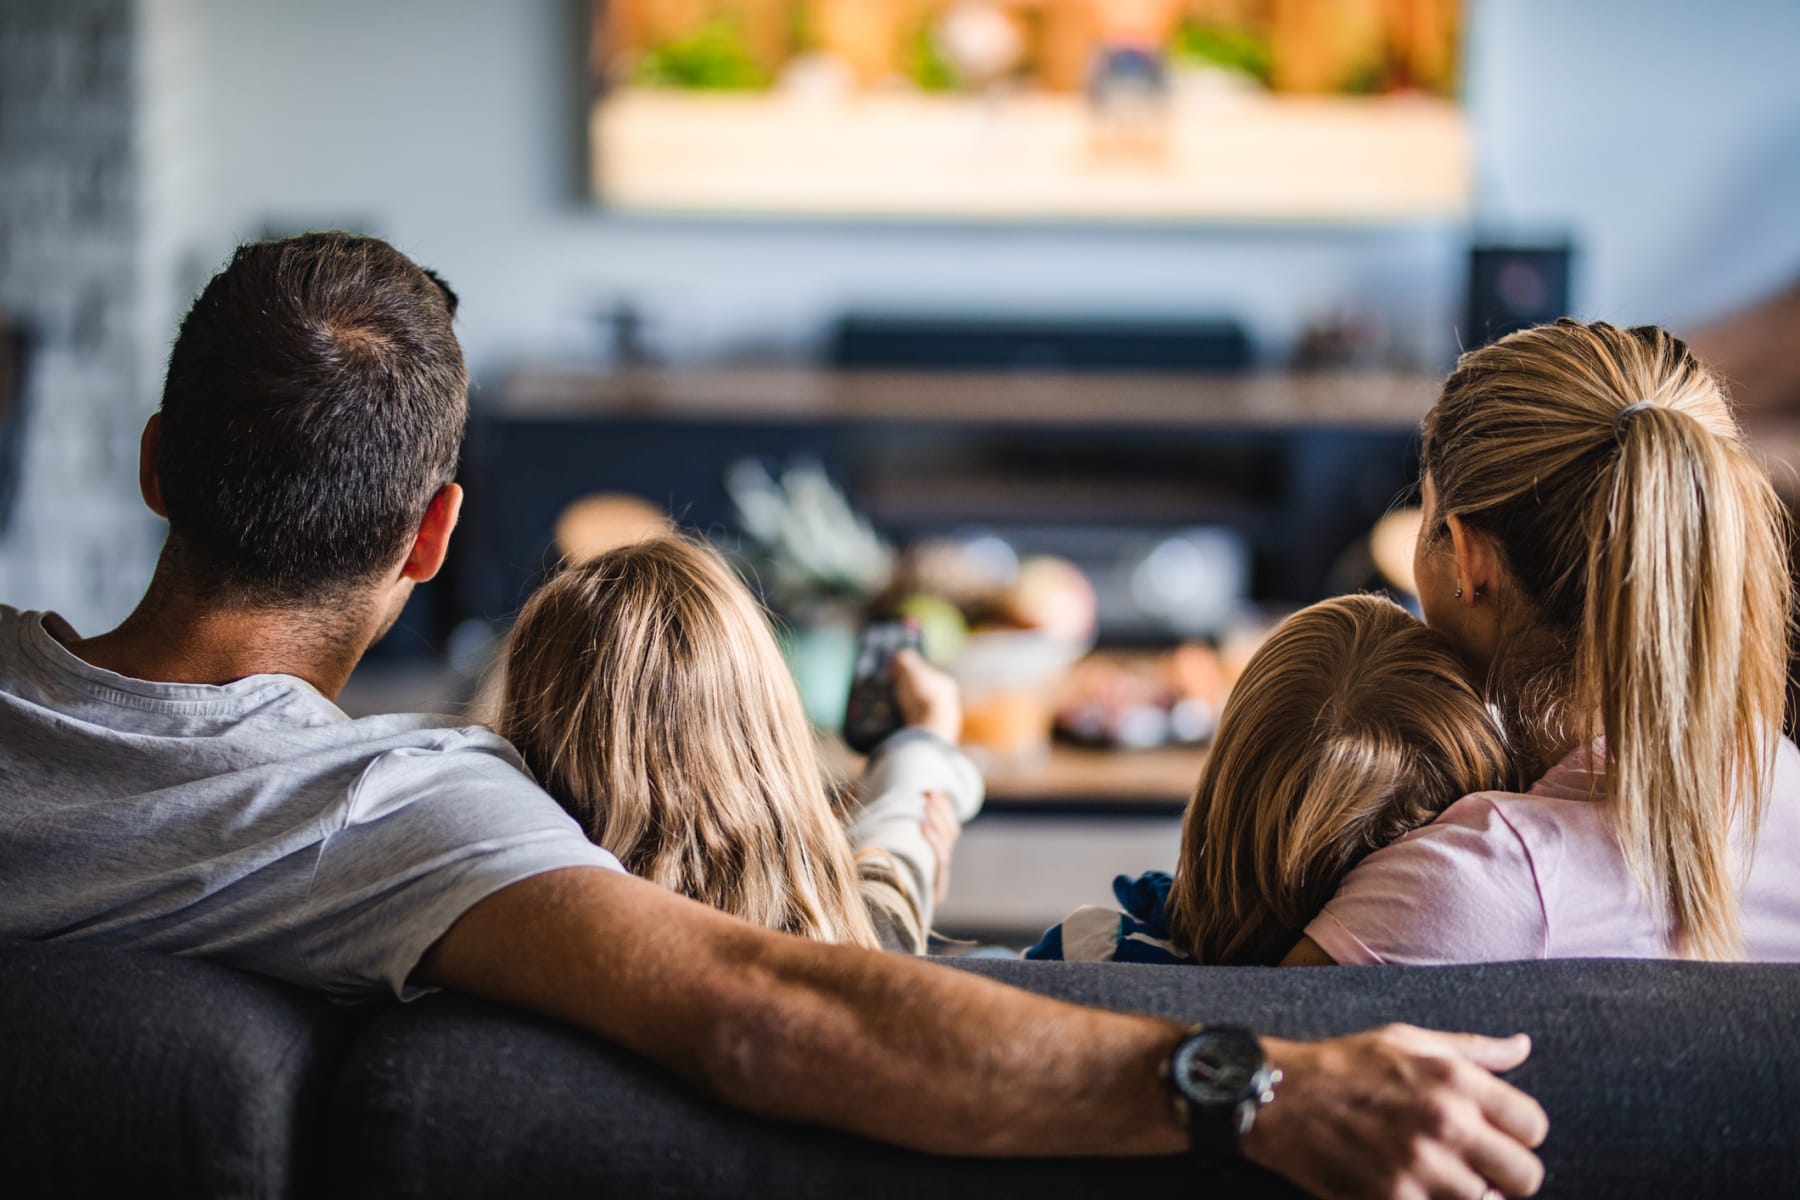 Family watches TV together.